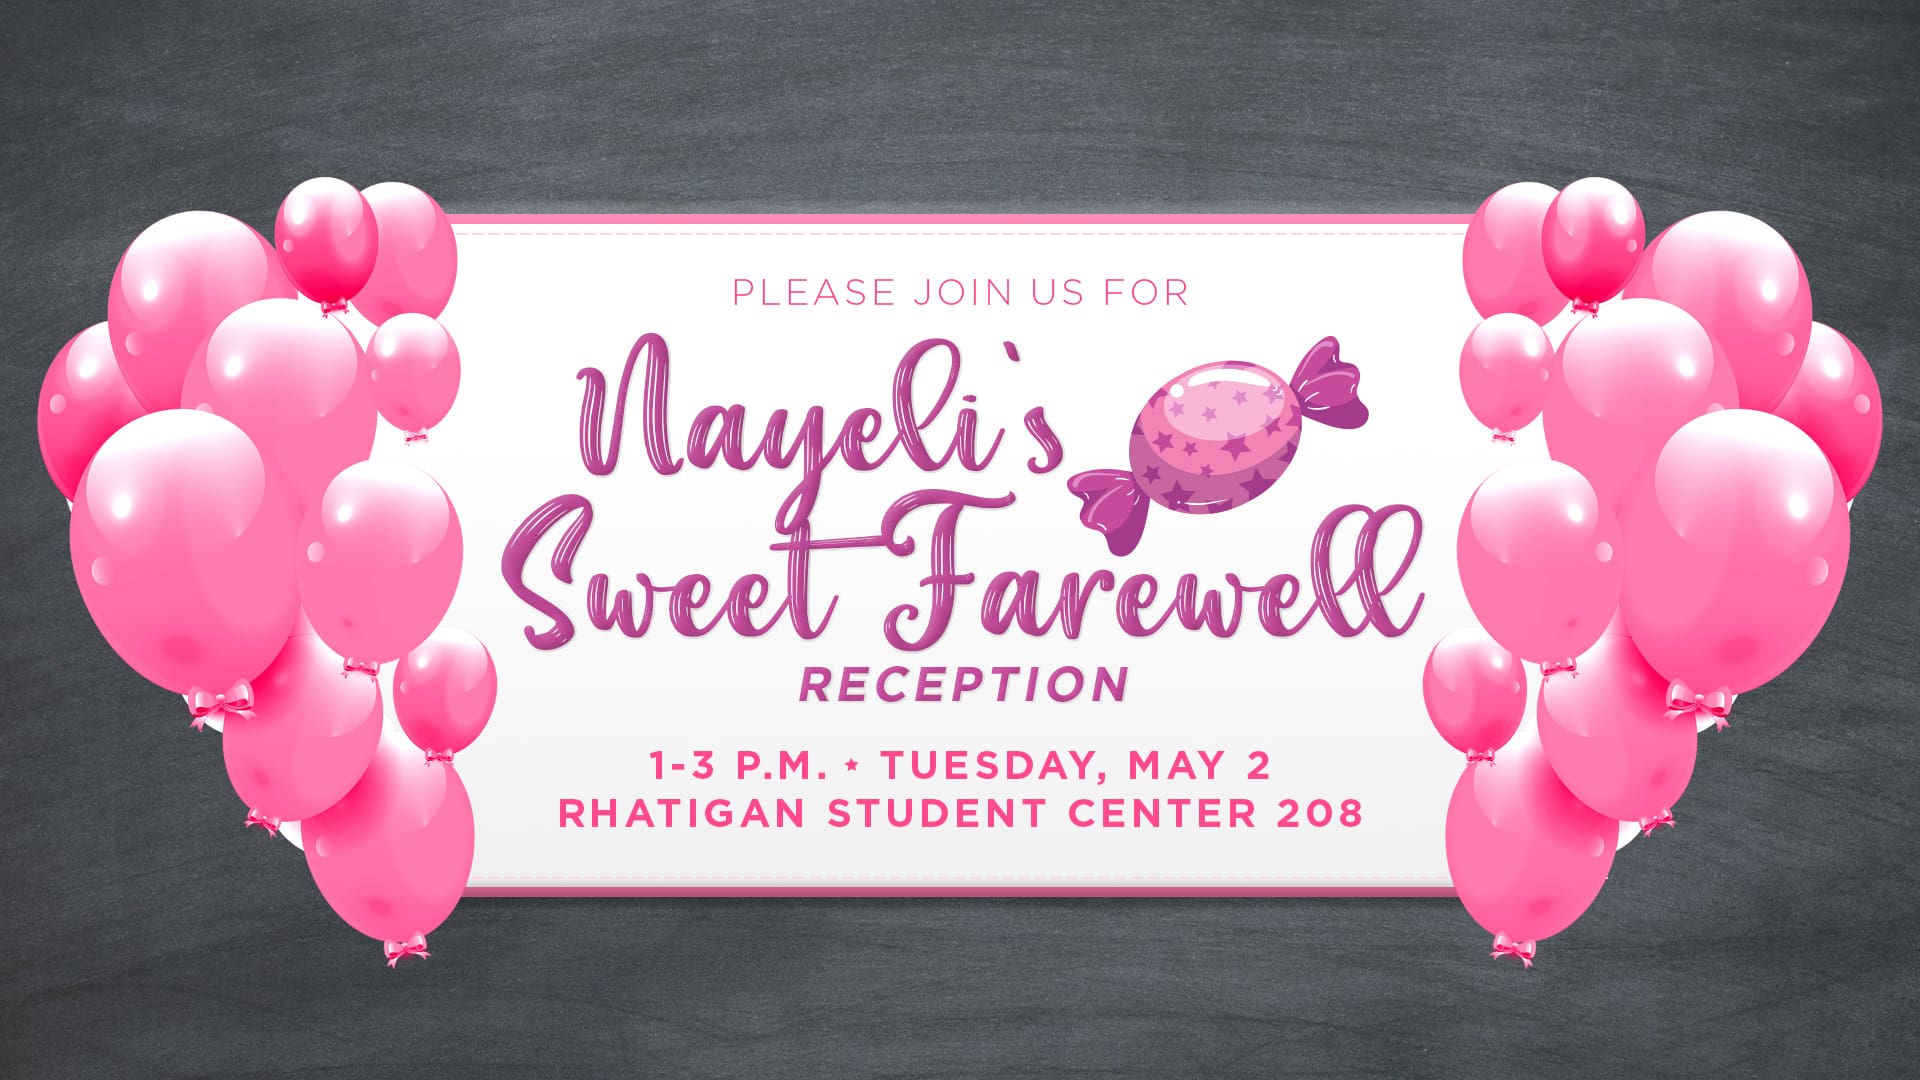 Graphic with balloons and sweets and the text, "Please join us for Nayeli's Sweet Farewell Reception, 1-3 p.m. Tuesday, May 2, Rhatigan Student Center 208"